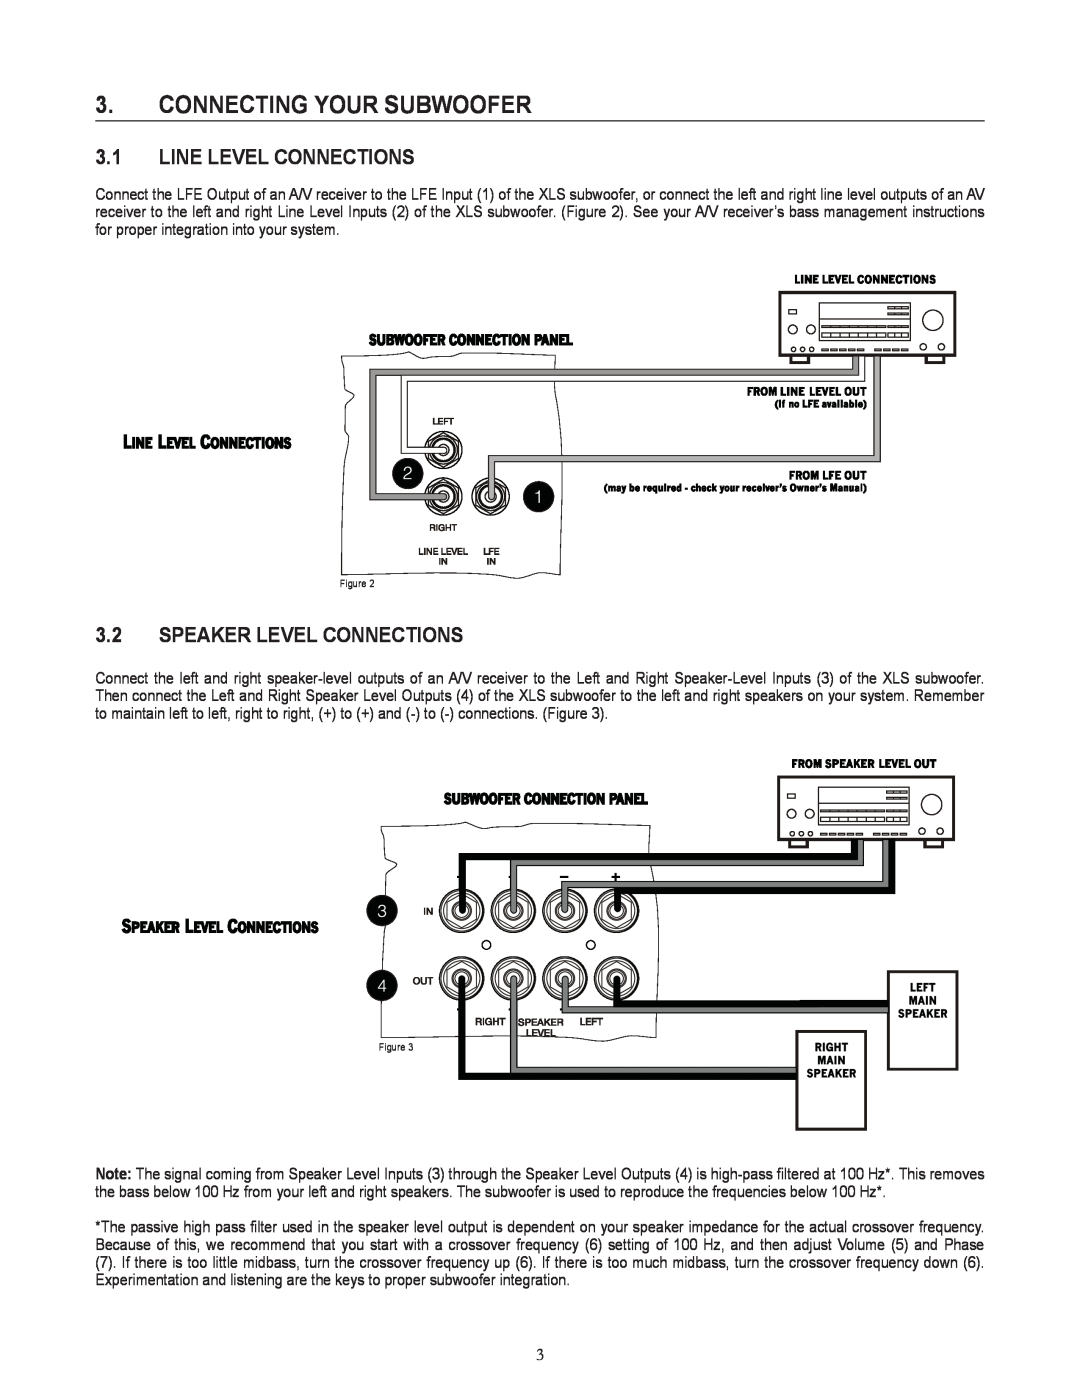 Cerwin-Vega XLS-15S, XLS-12S user manual Connecting Your Subwoofer, 3.1LINE LEVEL CONNECTIONS, 3.2SPEAKER LEVEL CONNECTIONS 